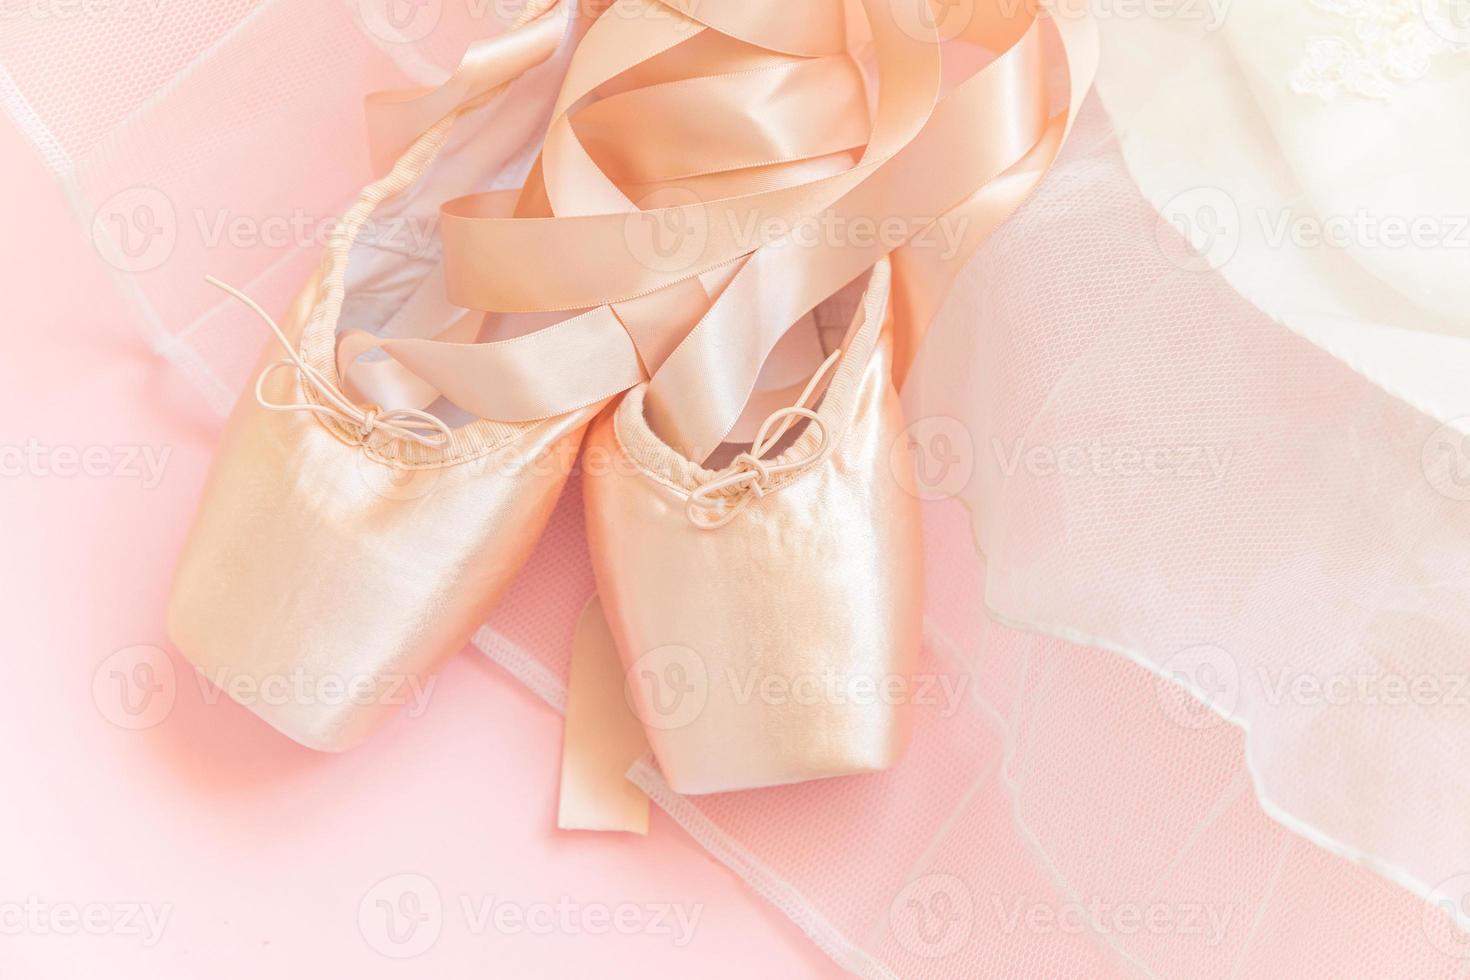 New pastel beige ballet shoes with satin ribbon and tutut skirt isolated on pink background. Ballerina classical pointe shoes for dance training. Ballet school concept. Top view flat lay, copy space photo